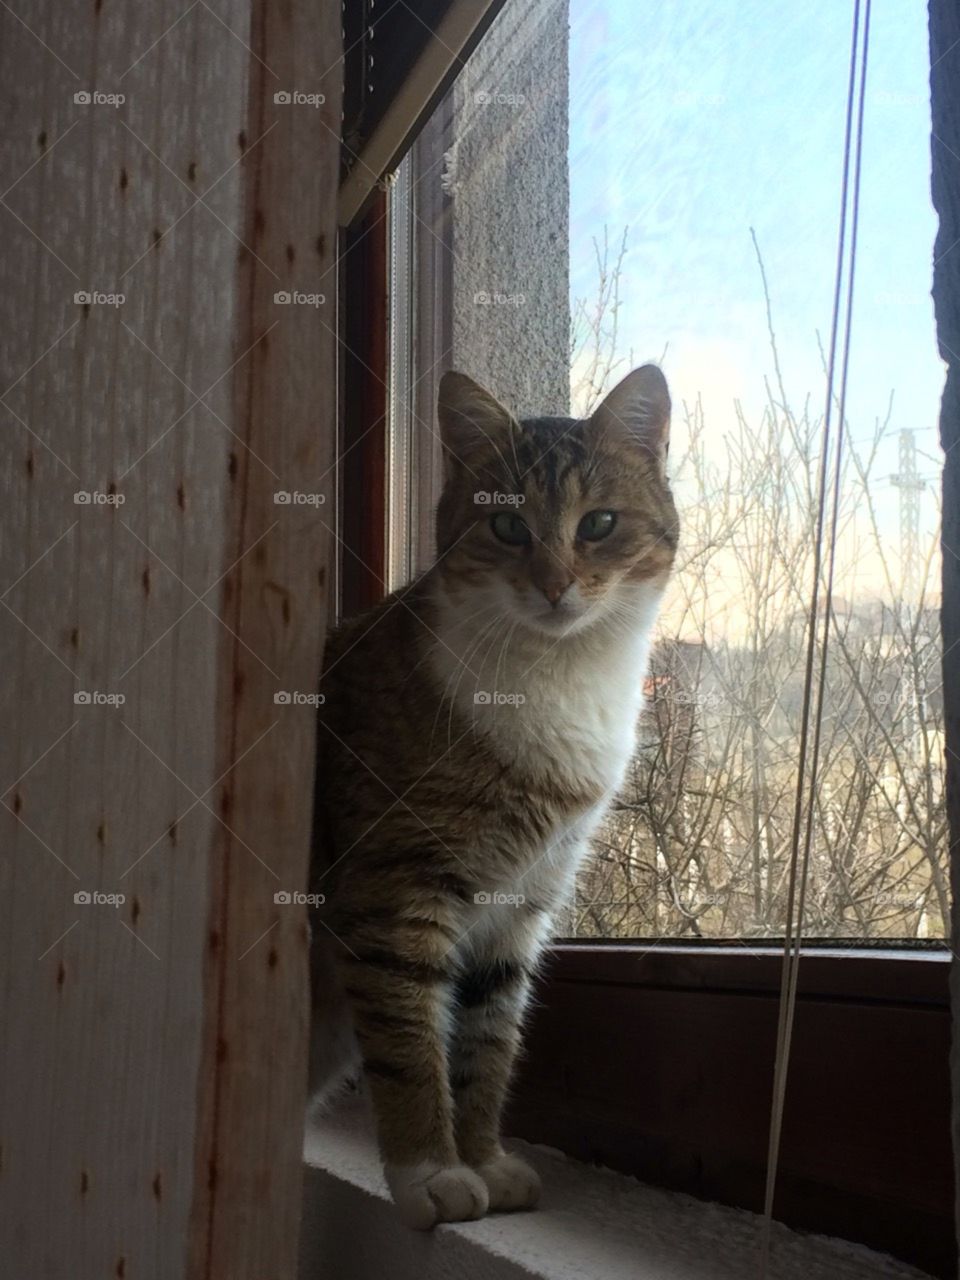 cat enjoys in the window view